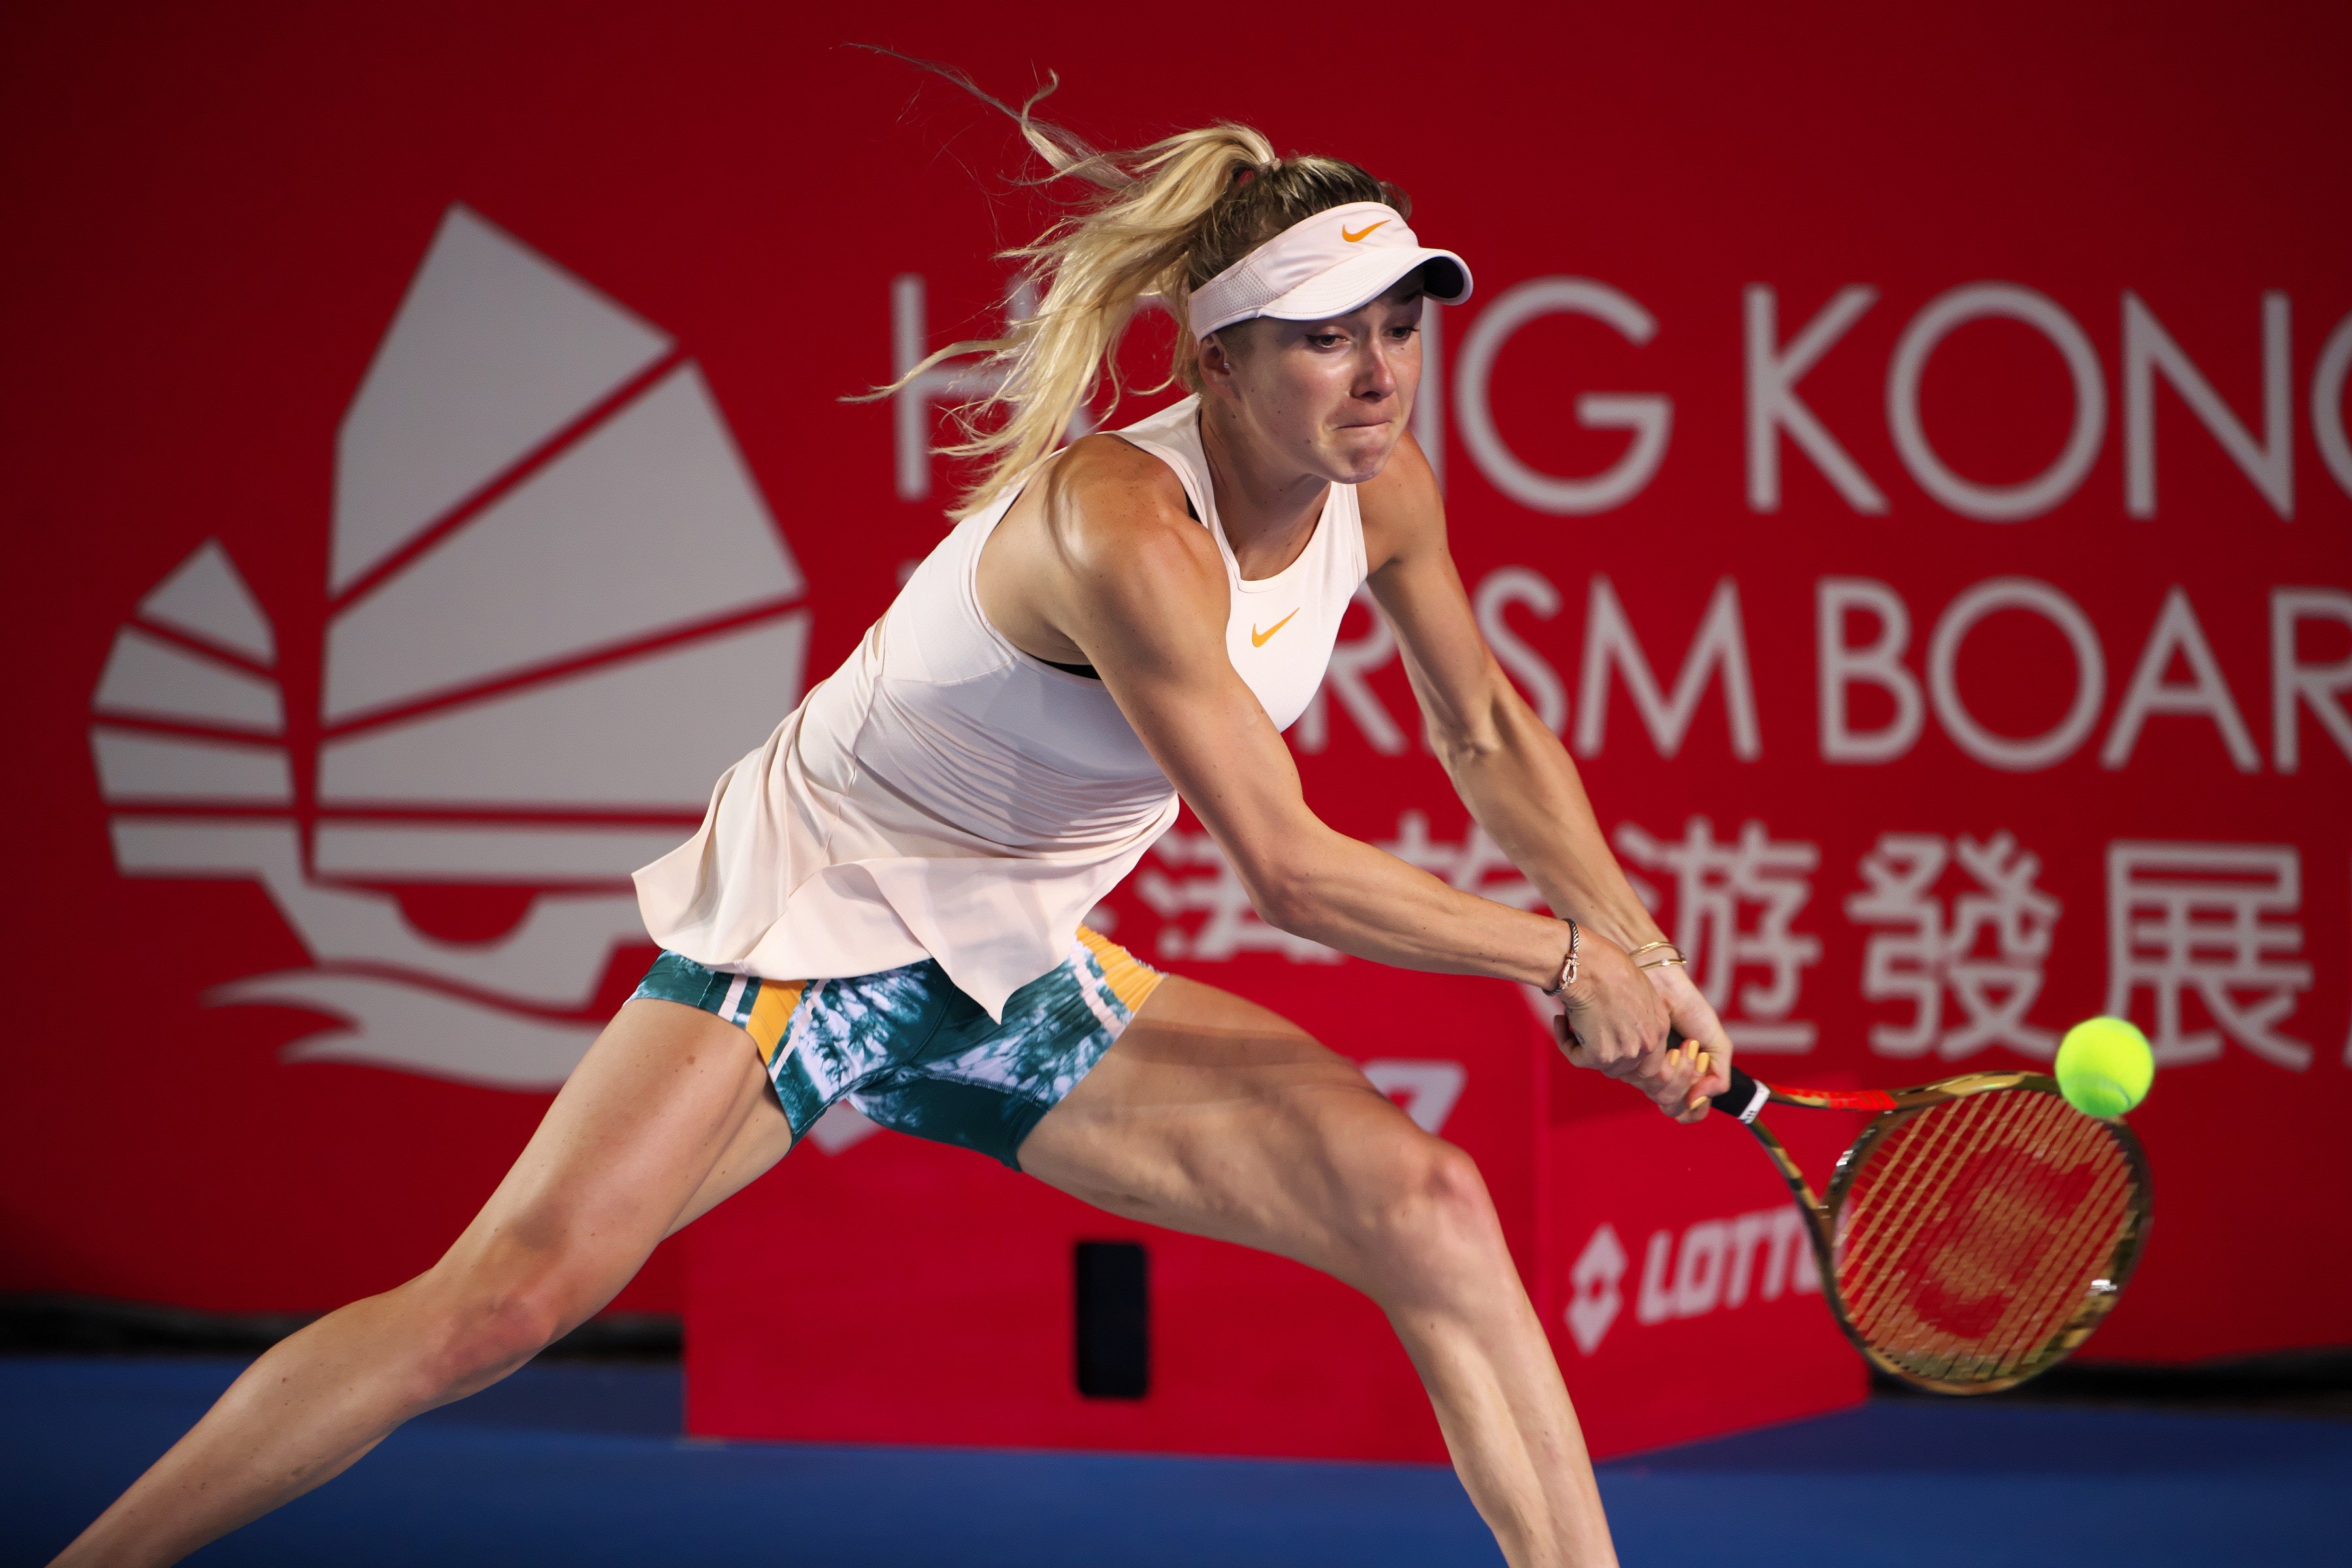 Elina Svitolina is out of the Hong Kong Open. Photos: Handout